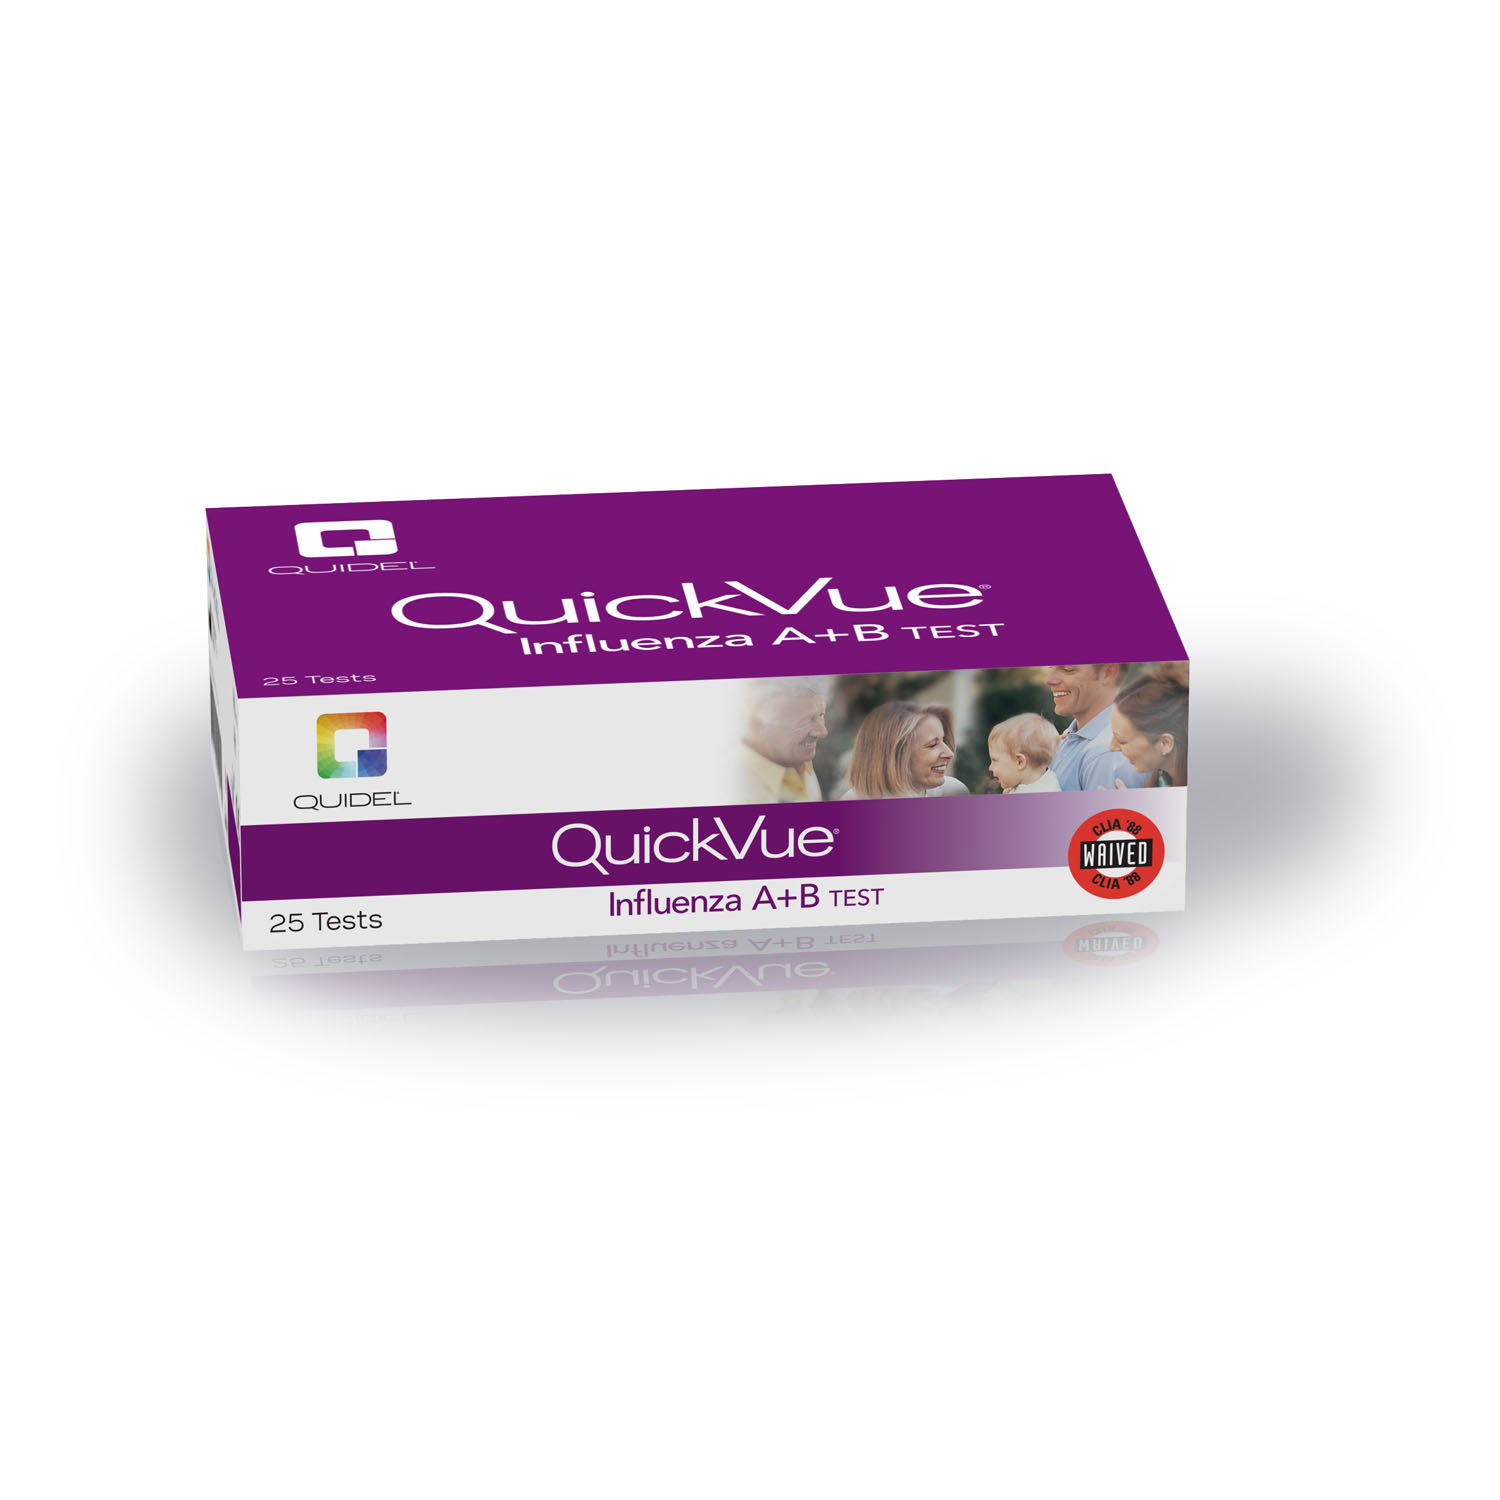 QUIDEL QUICKVUE INFLUENZA A+B TESTS : 20183 KT $384.57 Stocked